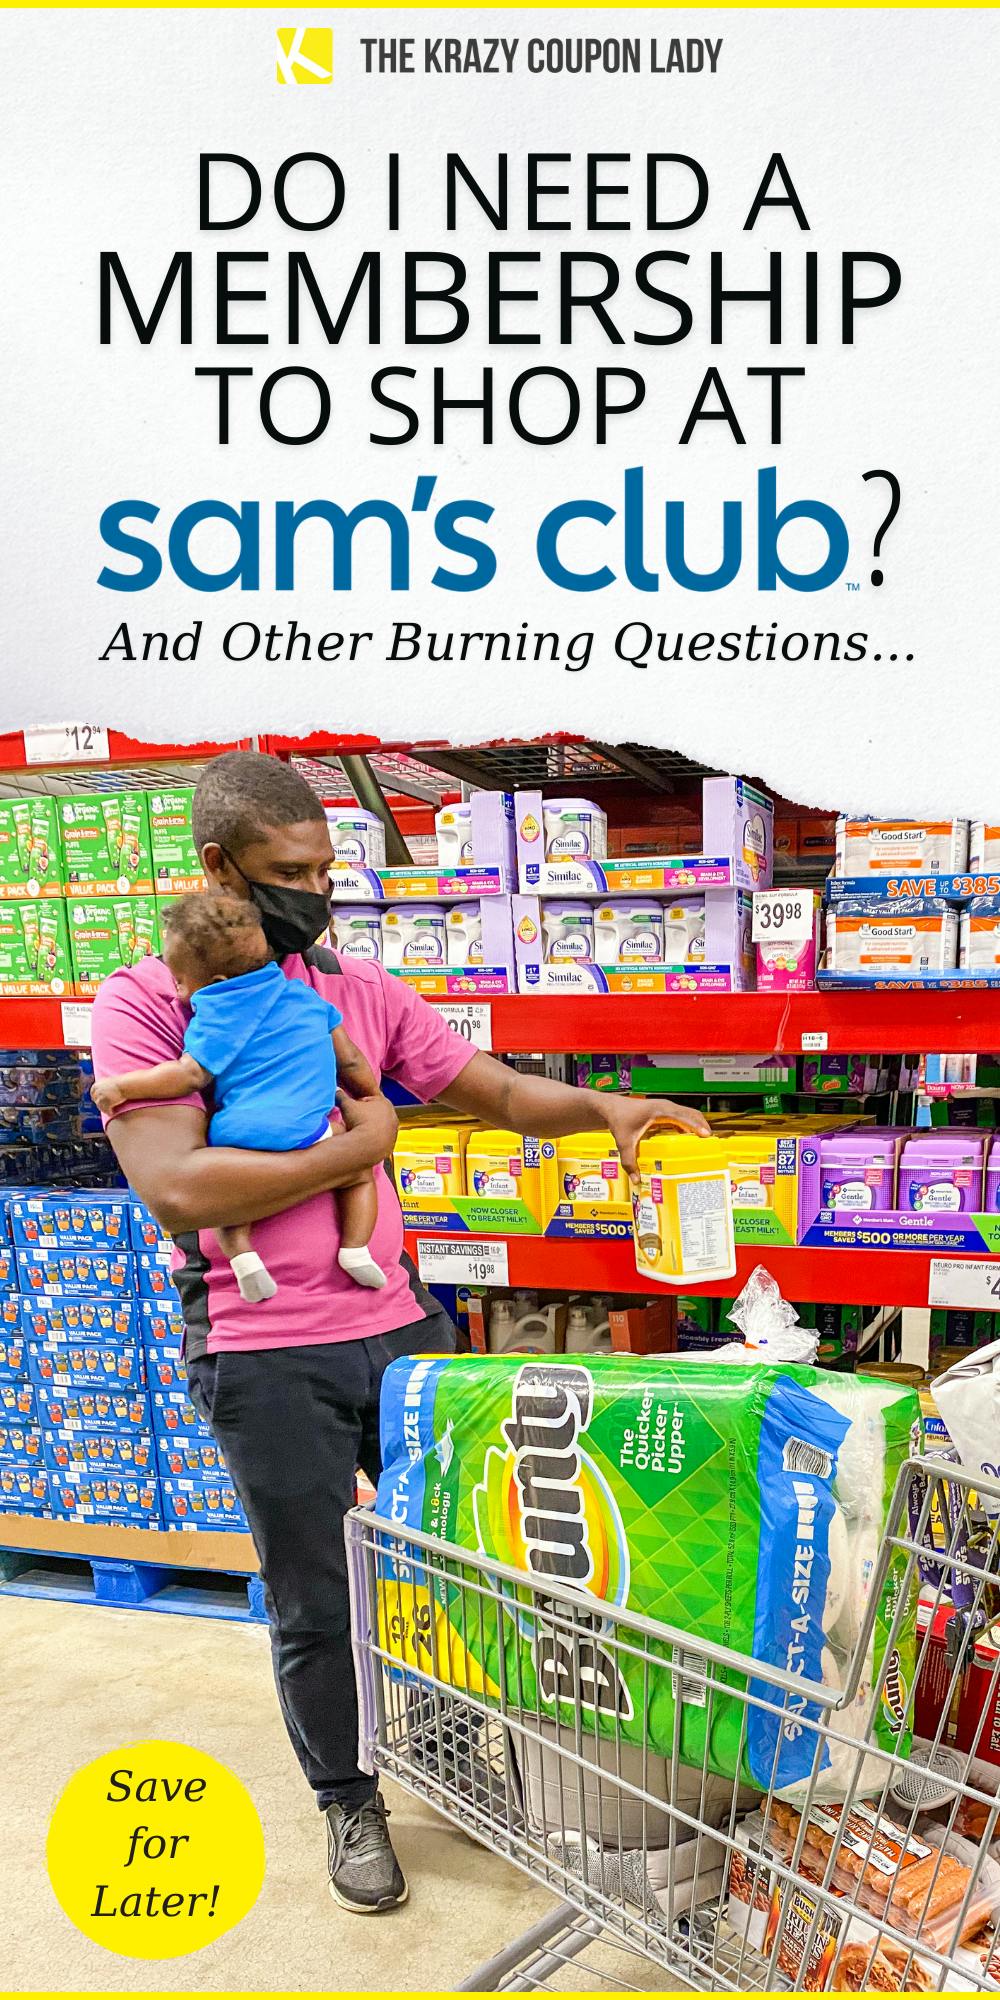 Do I Need a Membership for Sam's Club? And Other Burning Questions